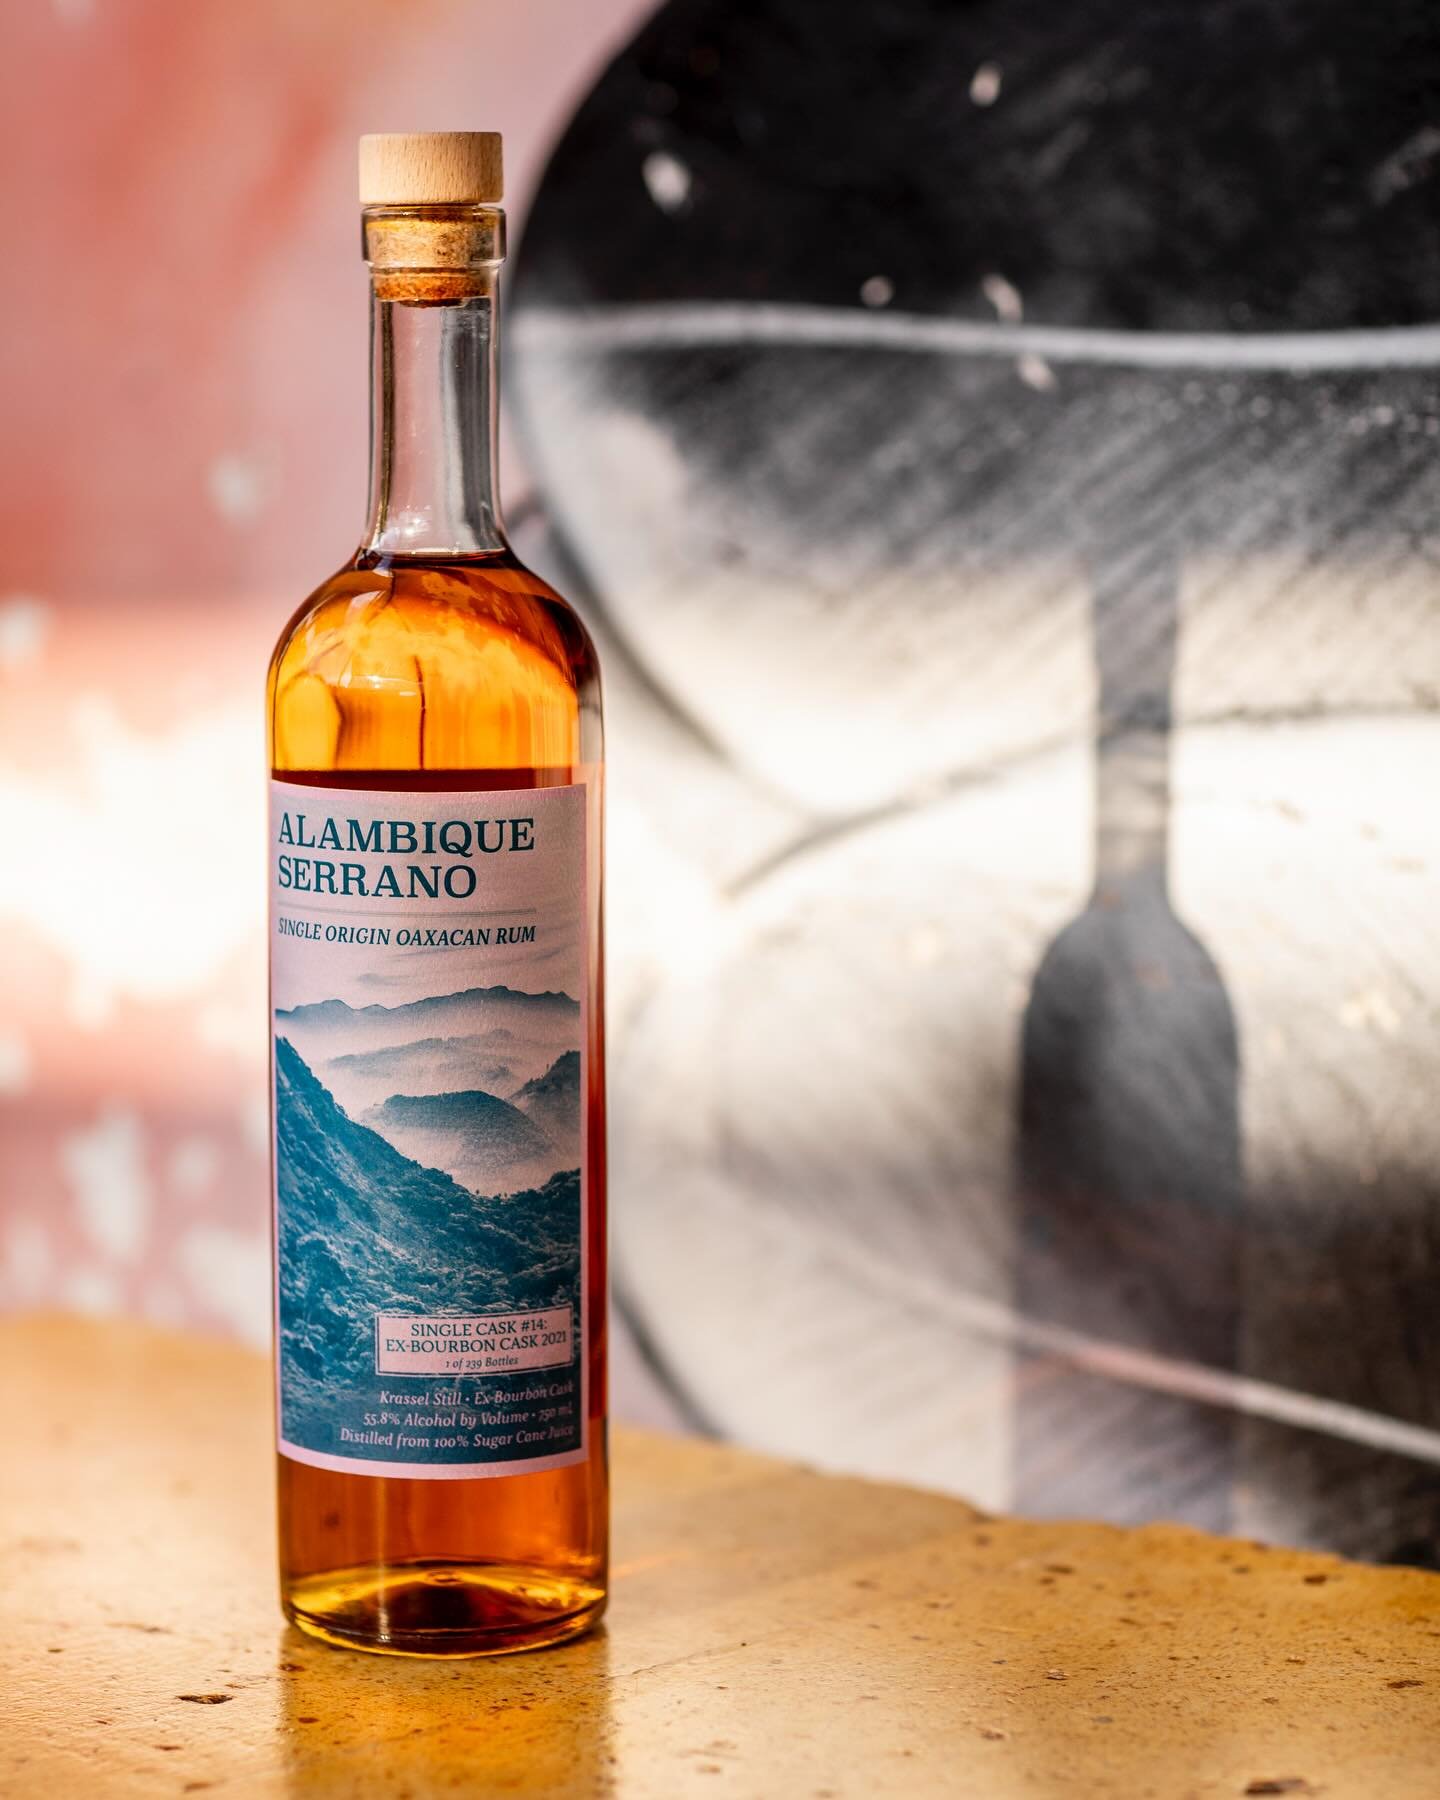 Alambique Serrano Single Origin Oaxacan Rum Single Cask 14 and Single Cask 20. Swipe for back label in-depth production notes and photos of various aging areas.

The Krassel family has four aging areas: a dry bodega located 5,600 feet above sea level